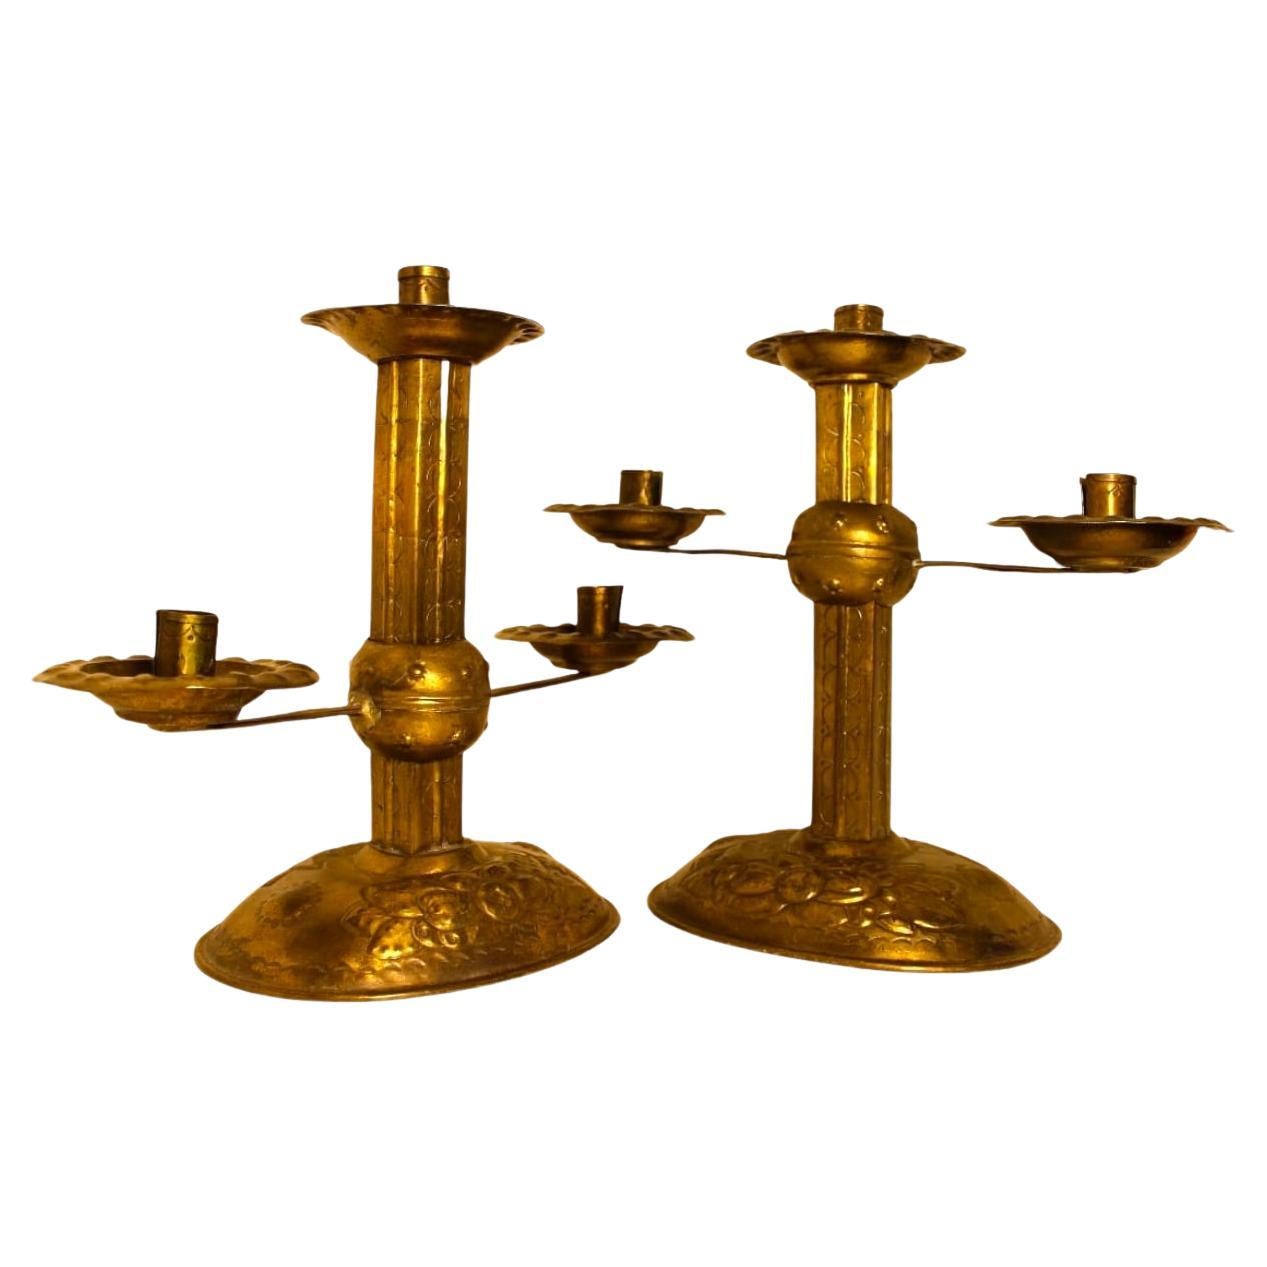 An elegant pair of gilded copper candlesticks from the 19th century 